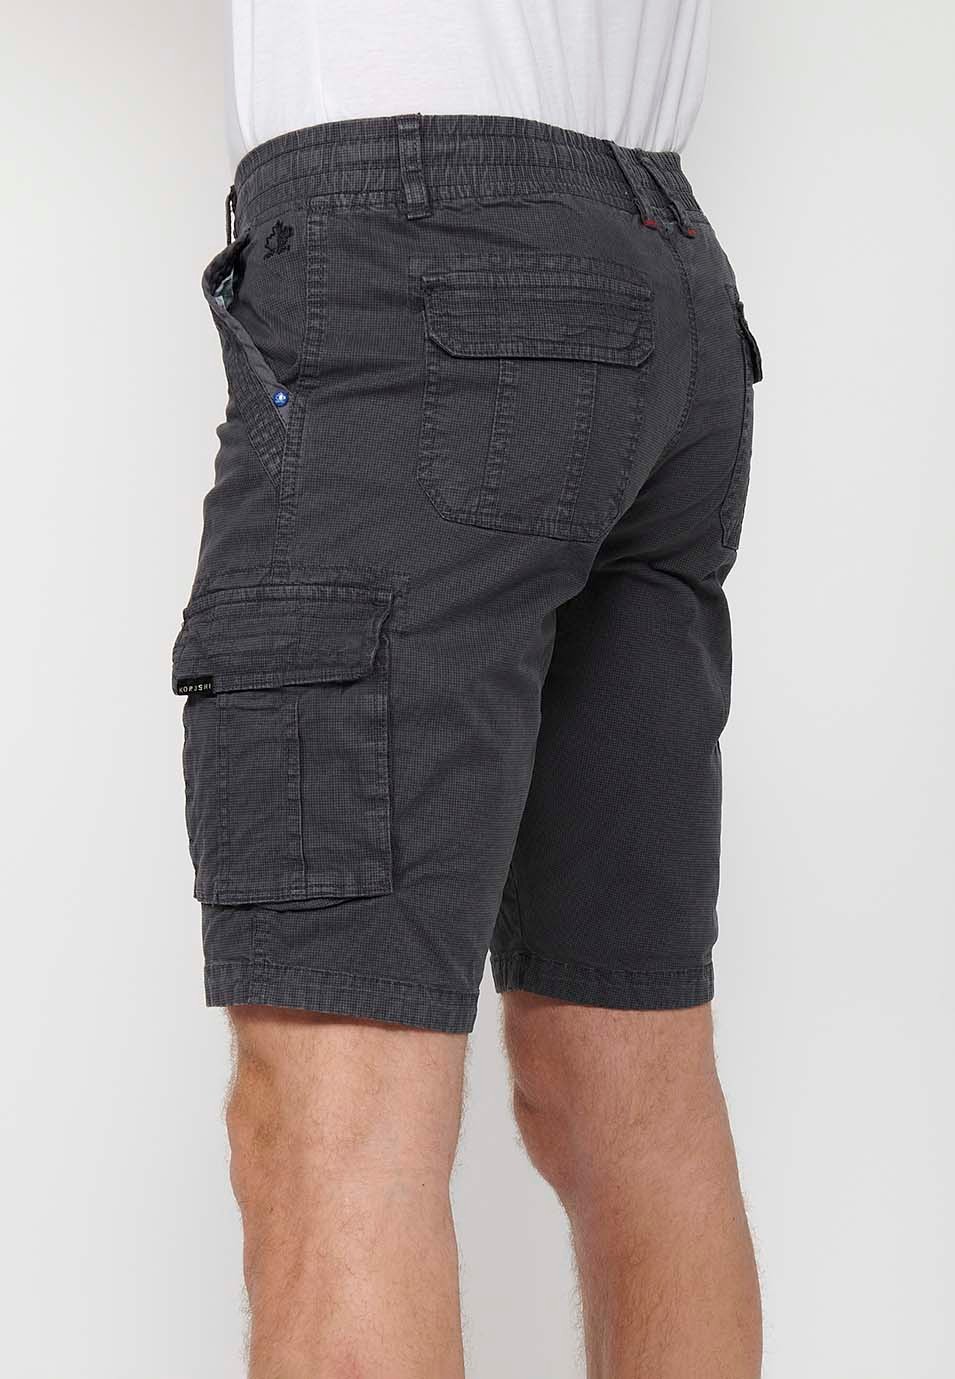 Cargo shorts with front closure with zipper and button and four pockets, two rear pockets with flap with two cargo pockets with flap and adjustable waist with drawstring in Gray for Men 9